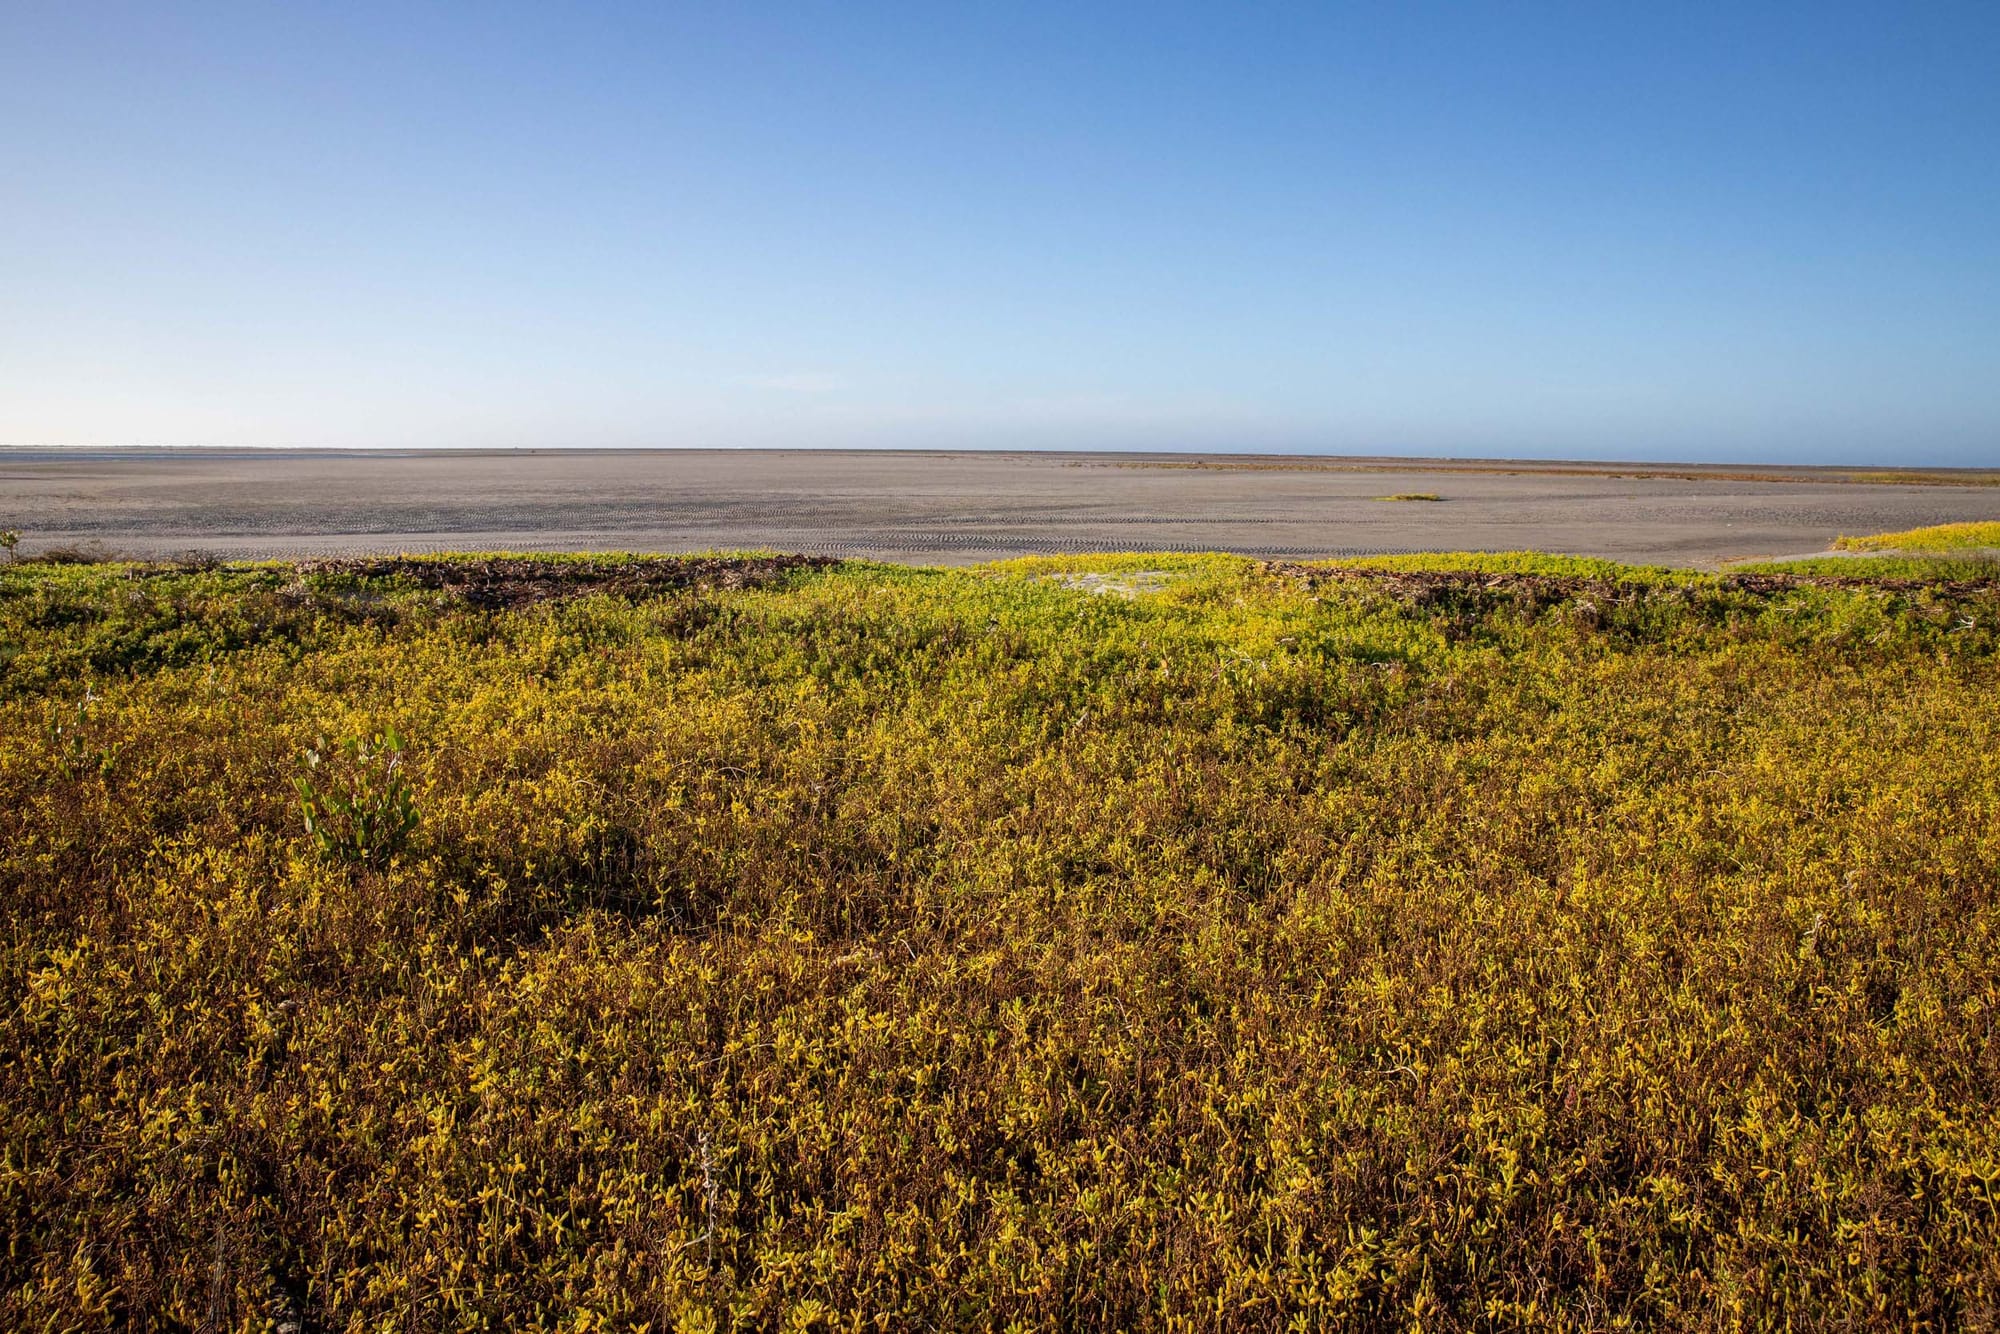 Flat land with mangroves in the foreground and sand in the background, with blue sky beyond